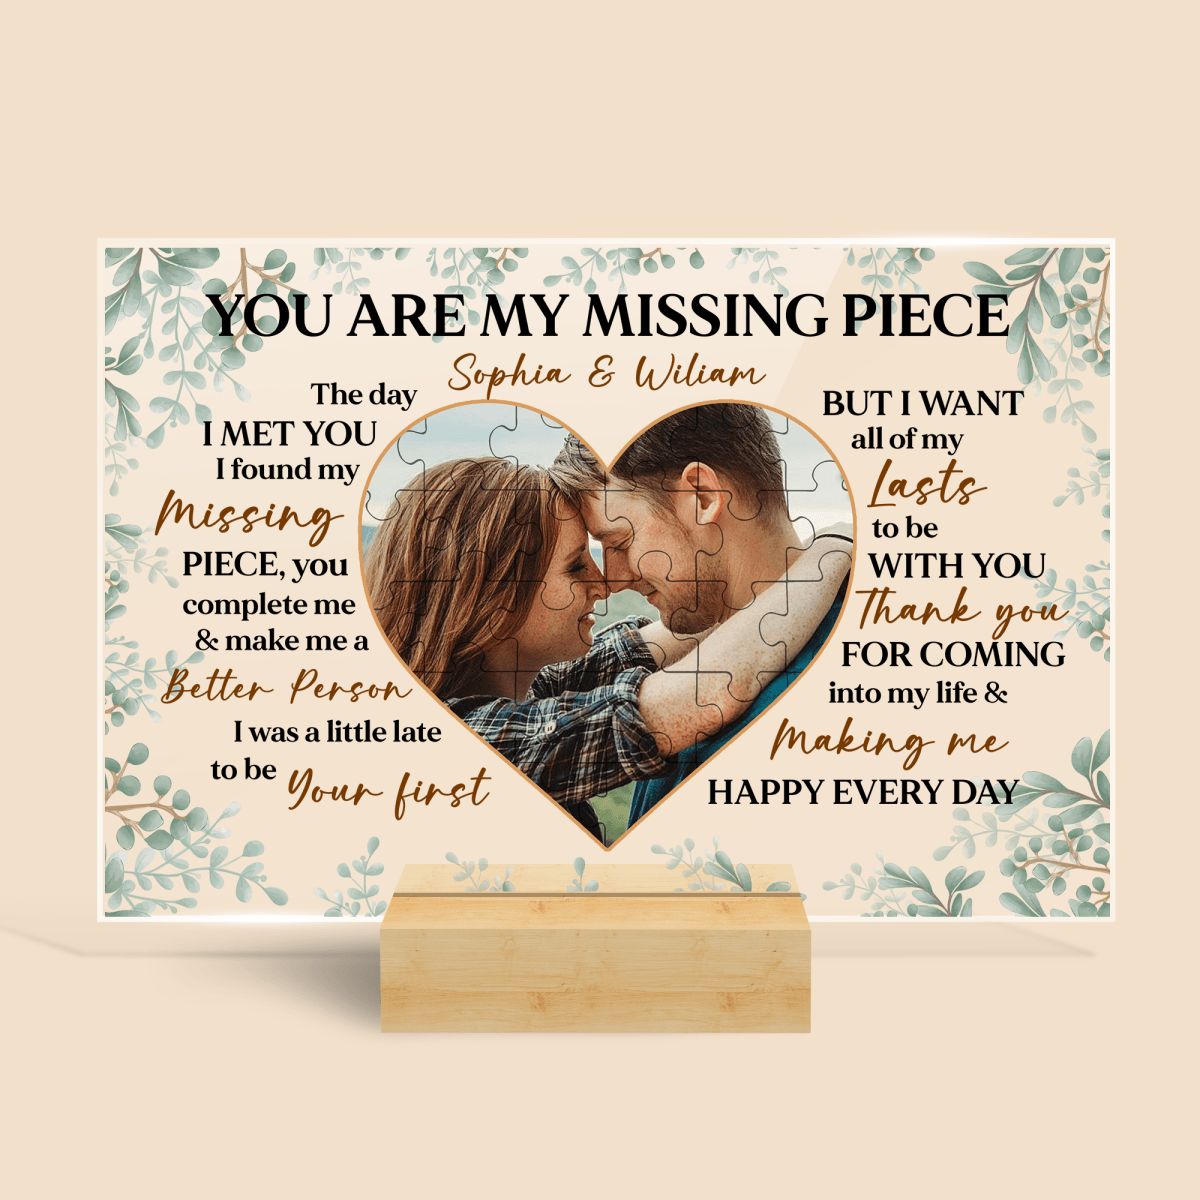 You Are My Missing Piece Love - Personalized Acrylic Plaque - Couple Gift